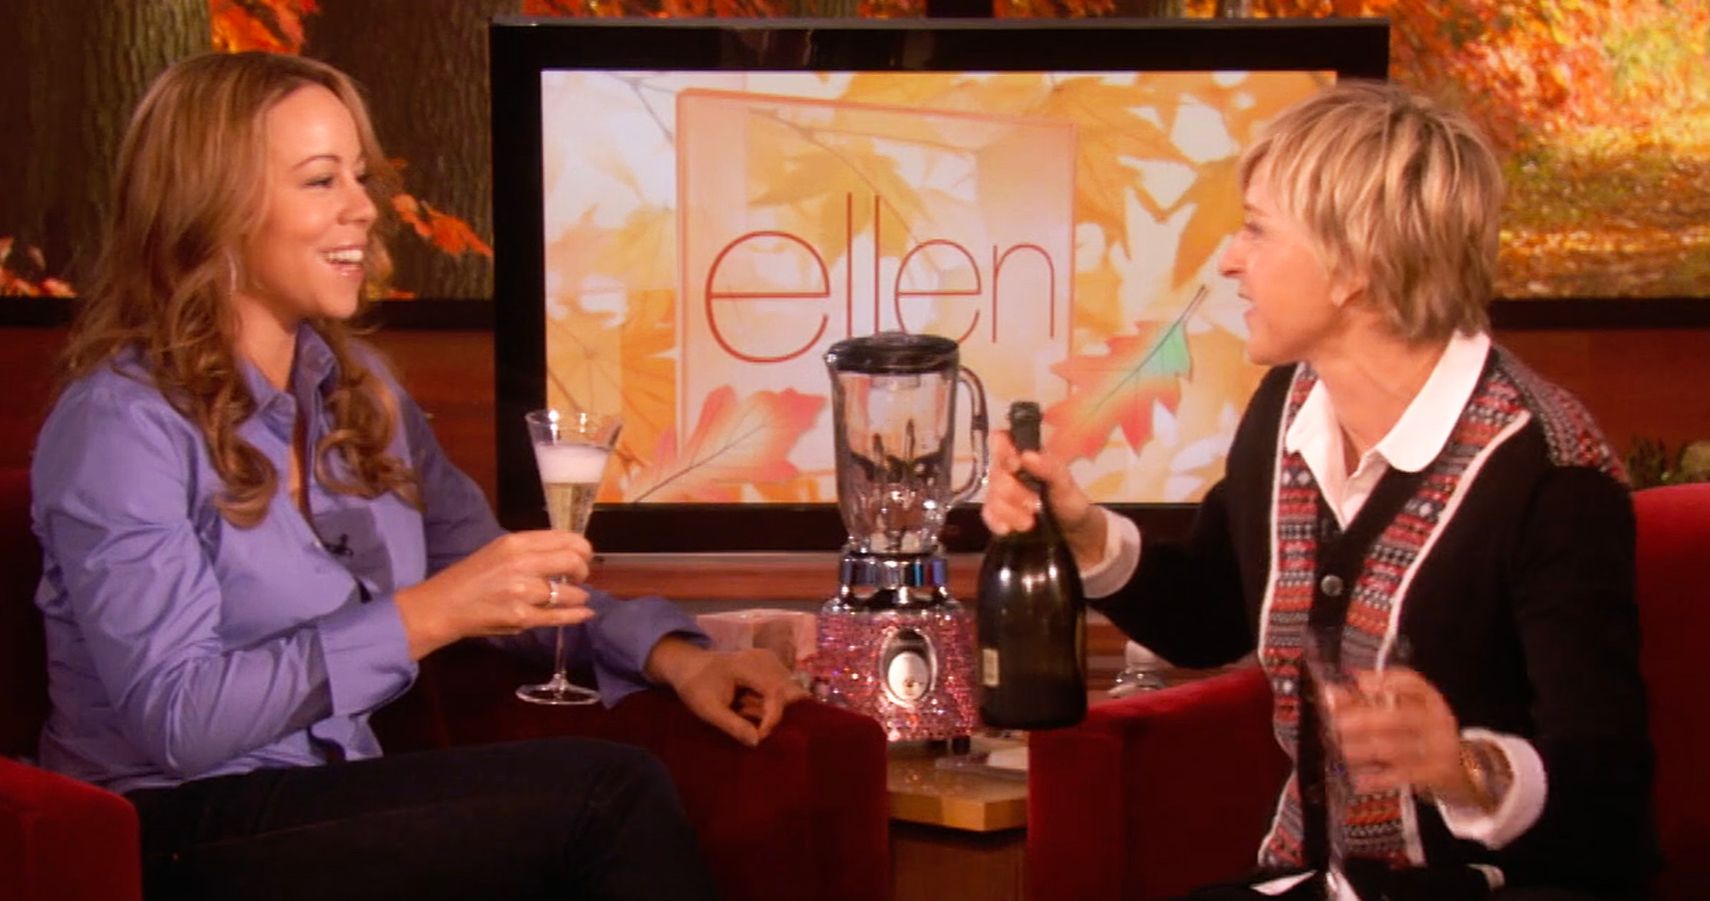 Mariah Carey Recalls 'Extremely Uncomfortable' Moment on Ellen, But Won't Say More